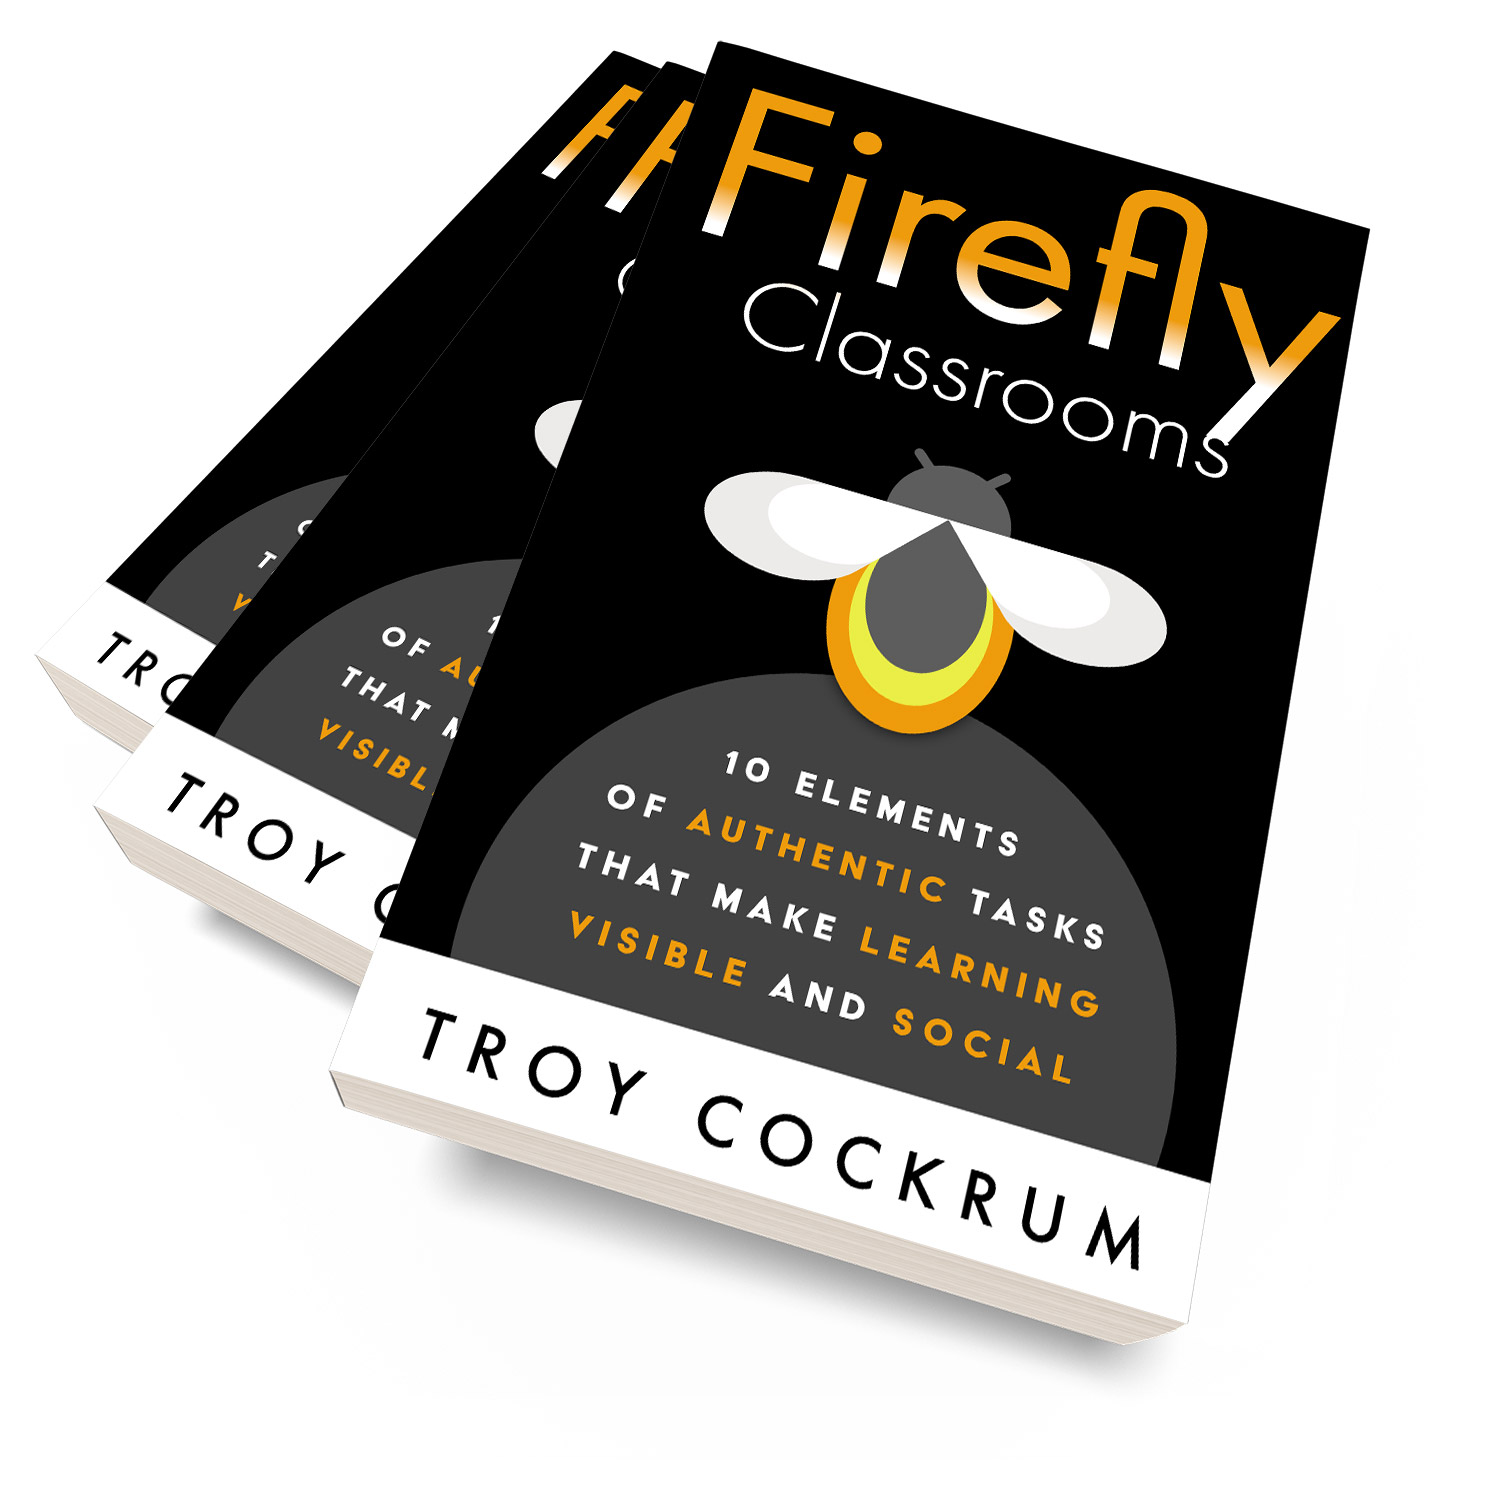 'Firefly Classrooms' is an excellent 'how to' book on harnessing the creativity of schoolchildren, by Troy Cockrum. The book cover and interior were designed by Mark Thomas, of coverness.com. To find out more about my book design services, please visit www.coverness.com.